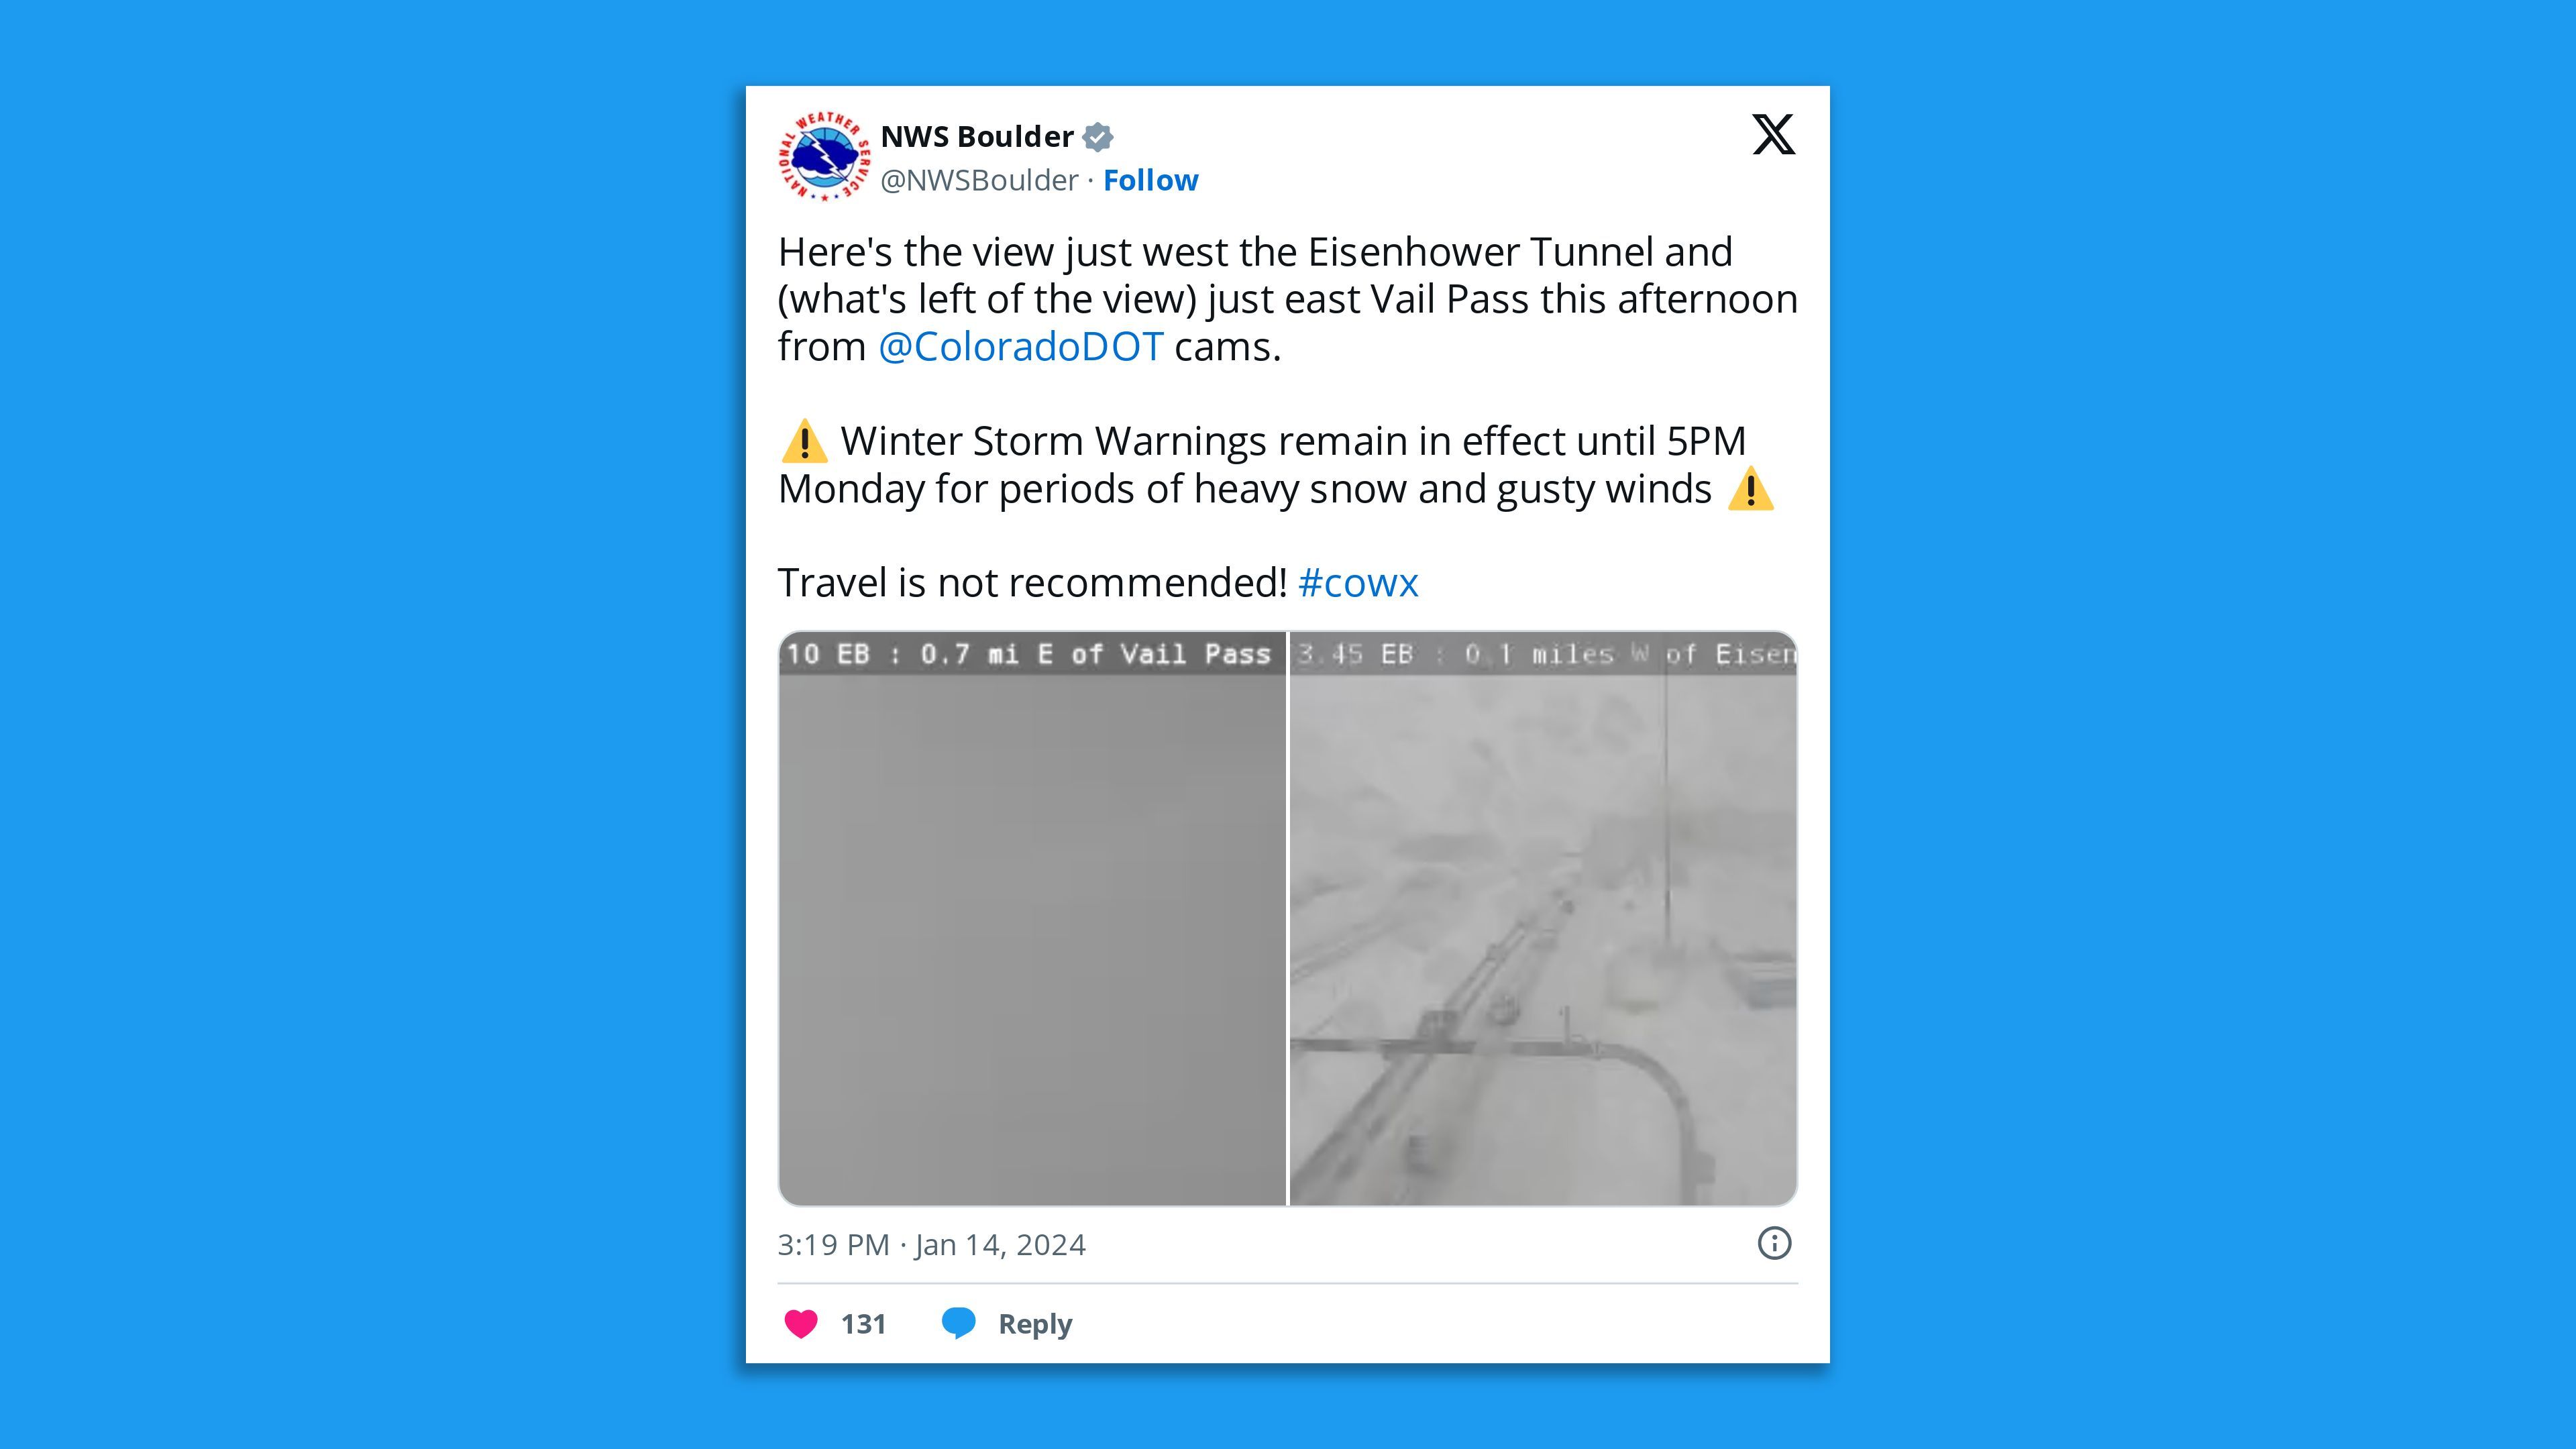 A screenshot of an NWS Boulder tweet, saying " Here's the view just west the Eisenhower Tunnel and (what's left of the view) just east Vail Pass this afternoon from  @ColoradoDOT  cams.  ⚠️ Winter Storm Warnings remain in effect until 5PM Monday for periods of heavy snow and gusty winds ⚠️  Travel is not recommended! "